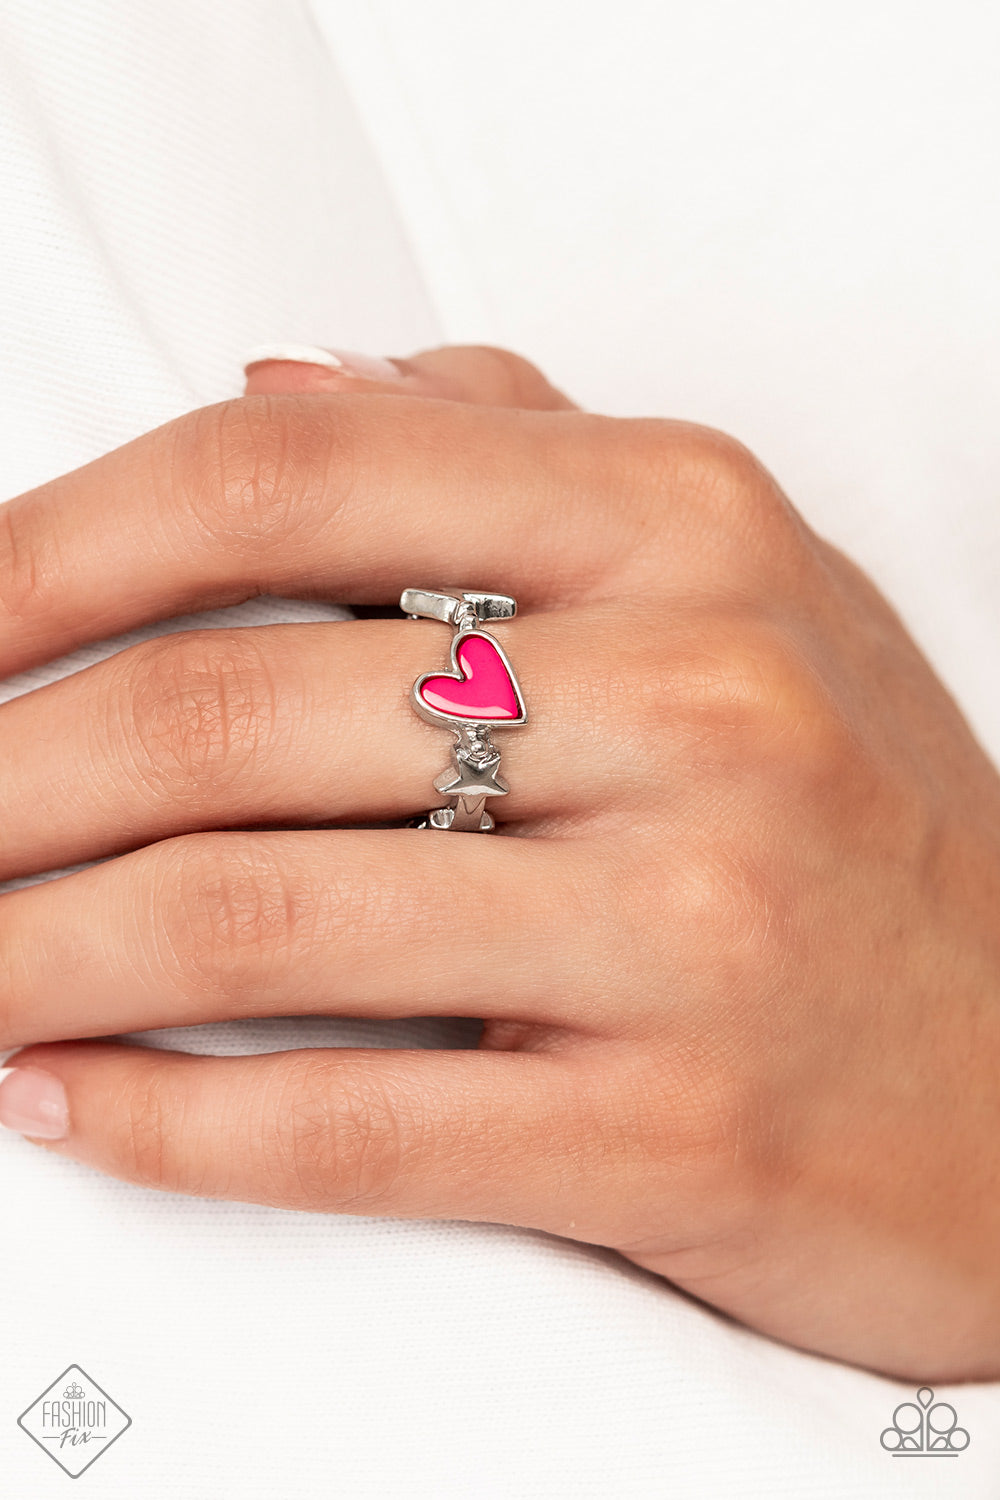 Contemporary Charm Pink Heart Dainty Ring Paparazzi Accessories. #P4WH-PKXX-252JJ. Free Shipping